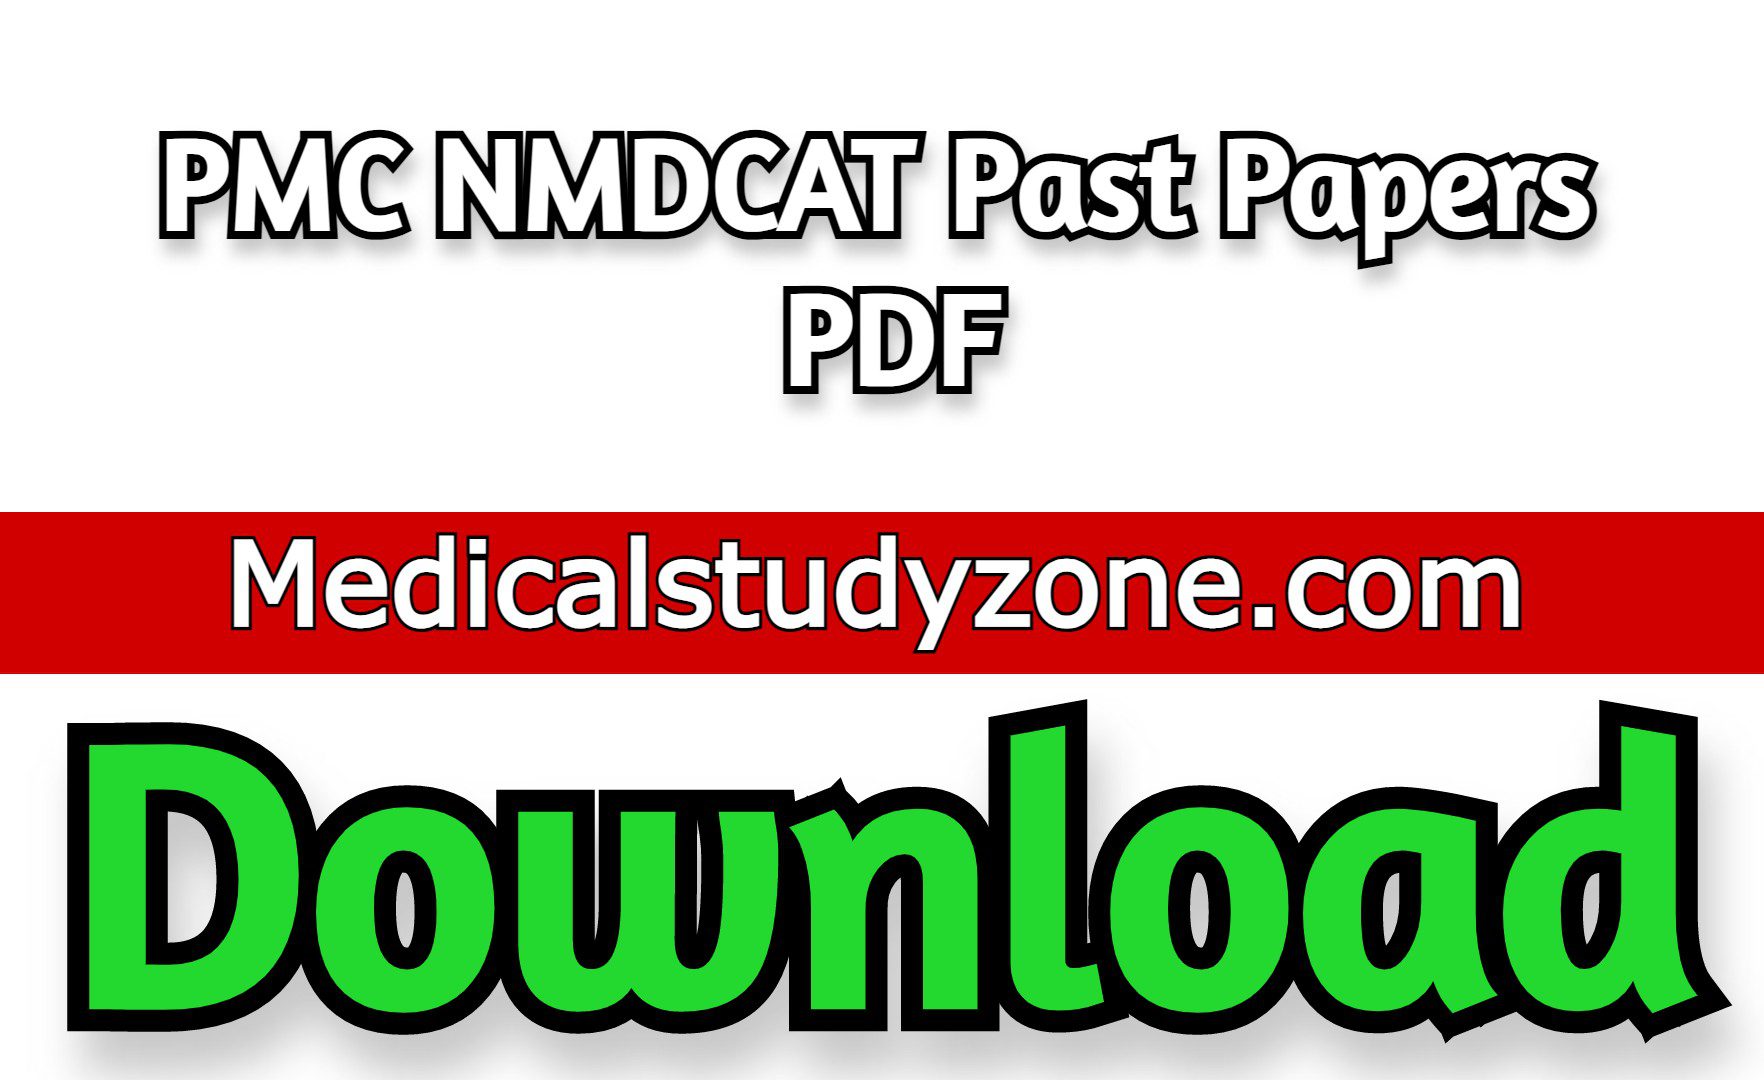 PMC NMDCAT Past Papers 2020-2021 PDF Free Download